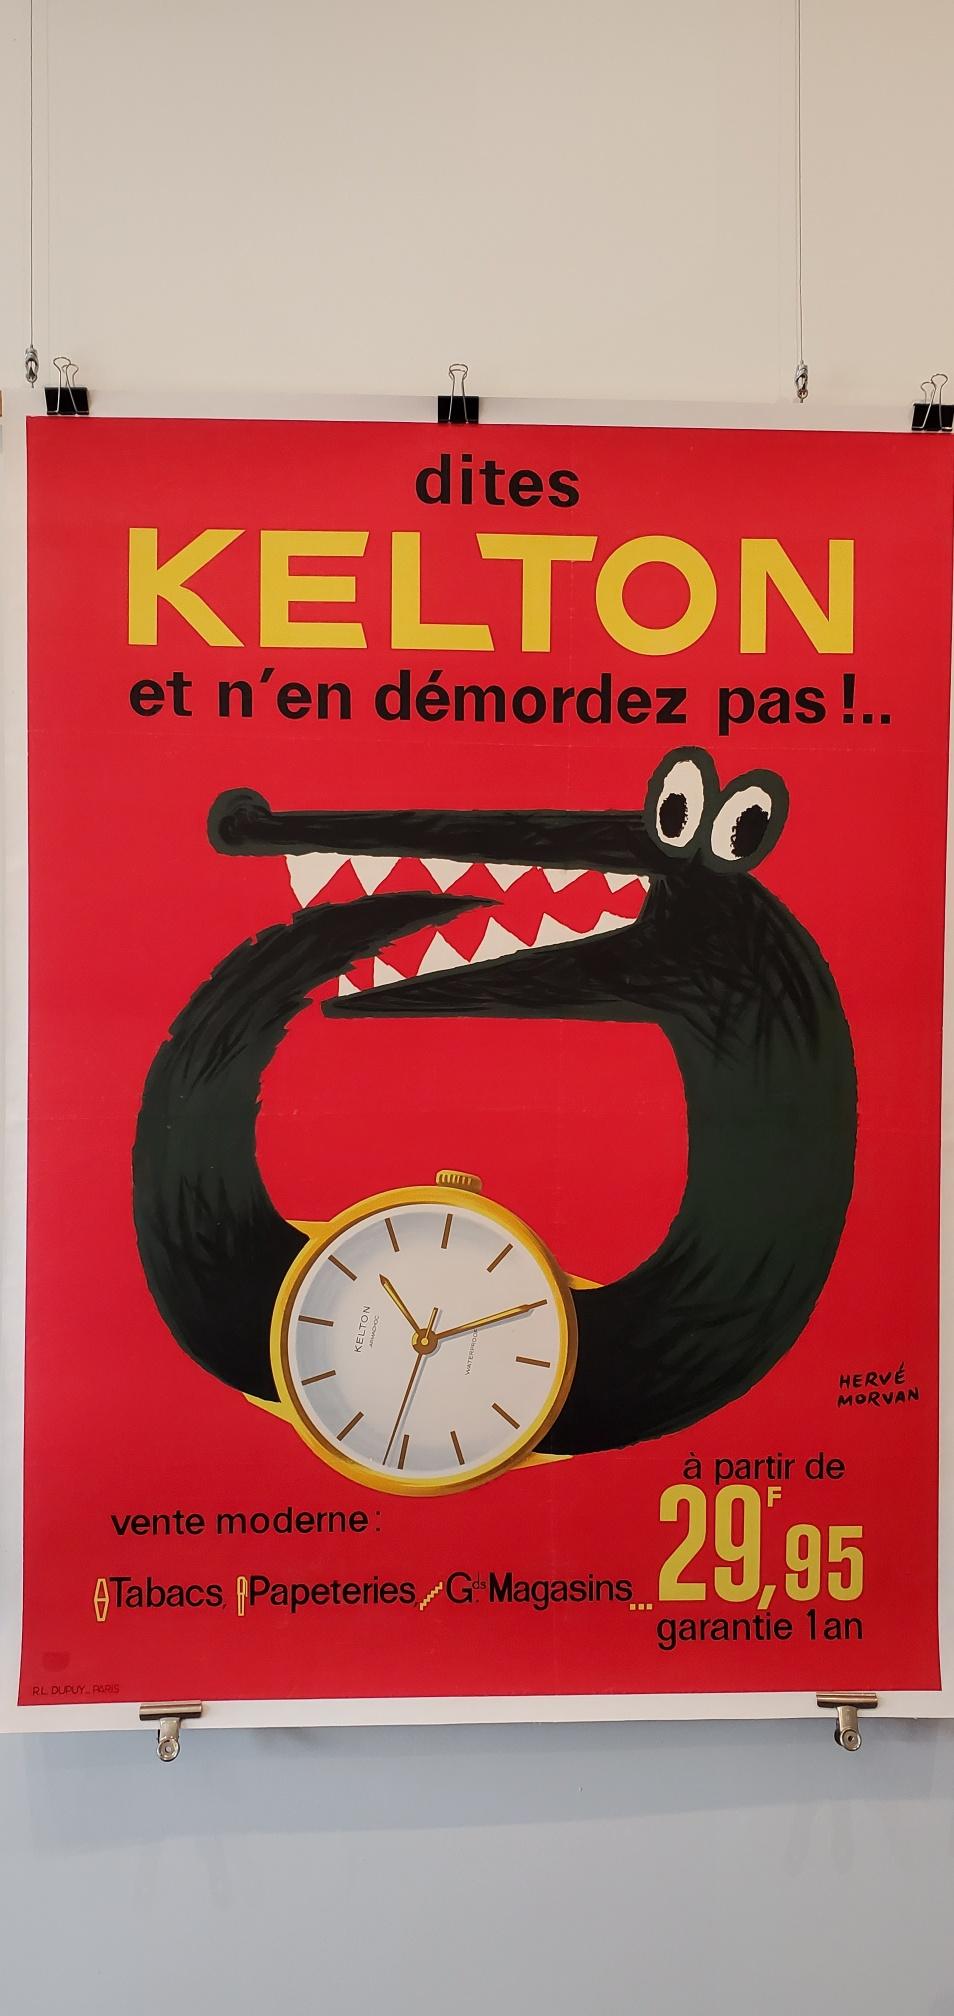 Original French Advertising Poster KELTON WATCH by Herve Morvan 1963

This is an original vintage poster linen backed for preservation, this poster is from 1963. 


ARTIST	
Herve Morvan

DIMENSIONS	
155 x 114

FROMAT	
Linen backed

YEAR	
1963